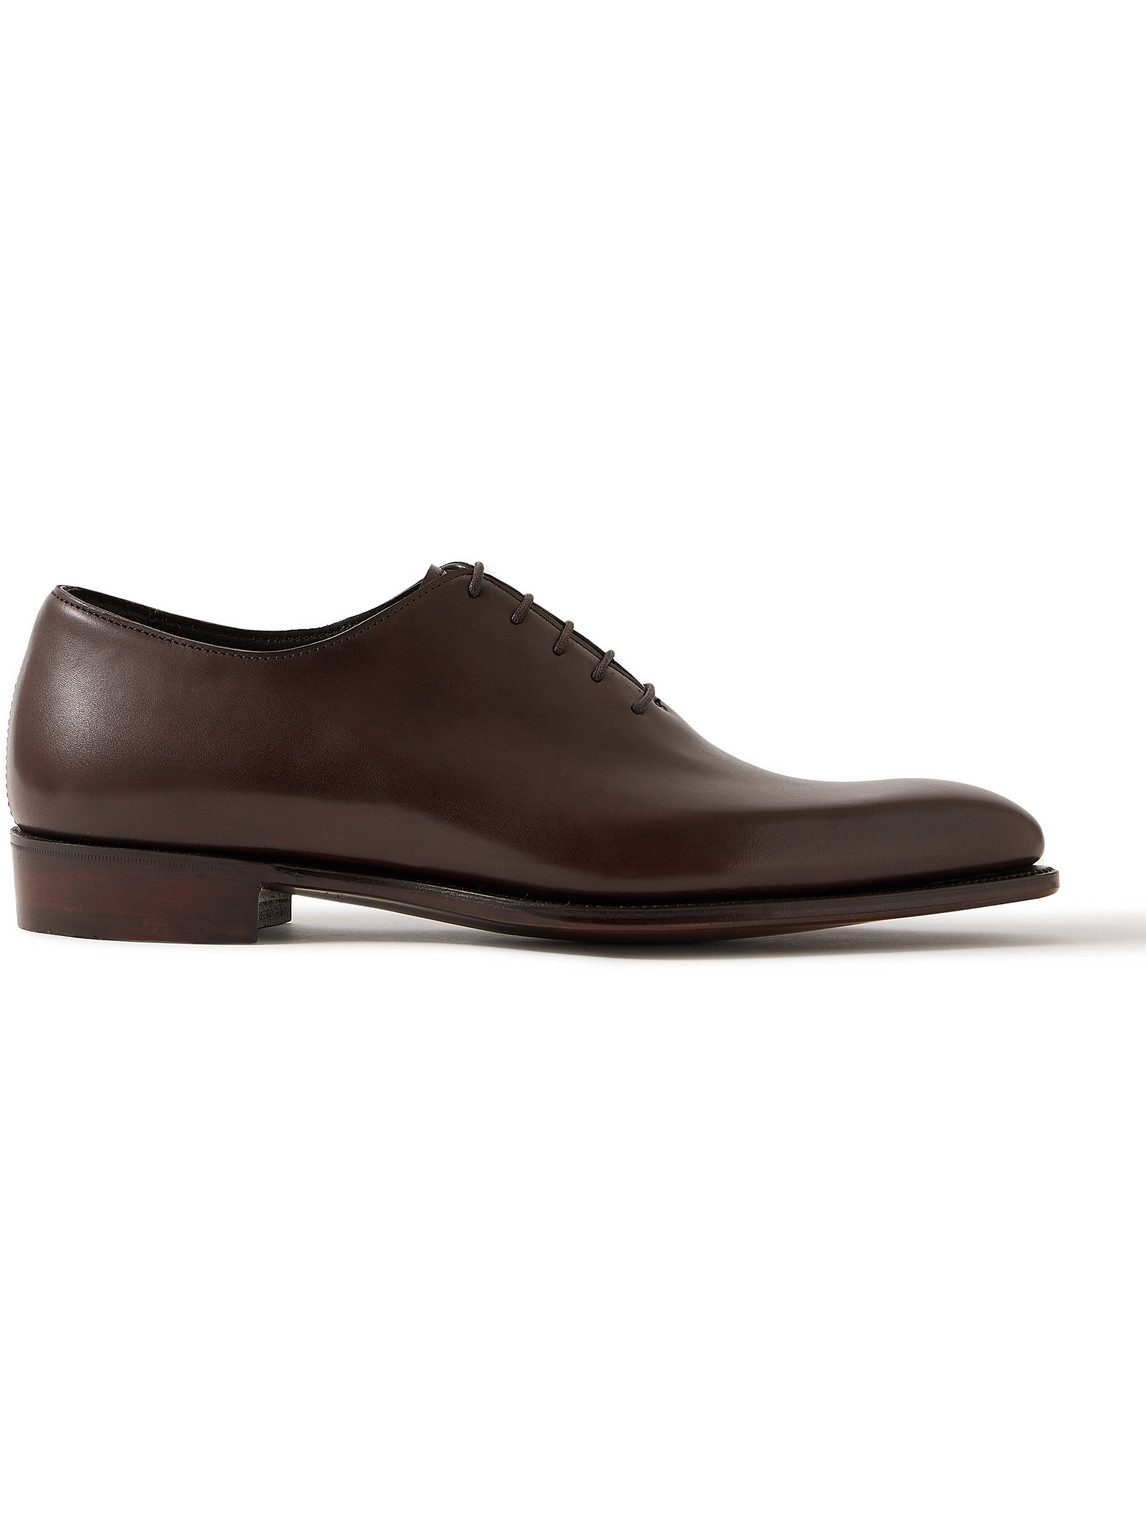 George Cleverley Merlin Leather Oxford Shoes In Brown